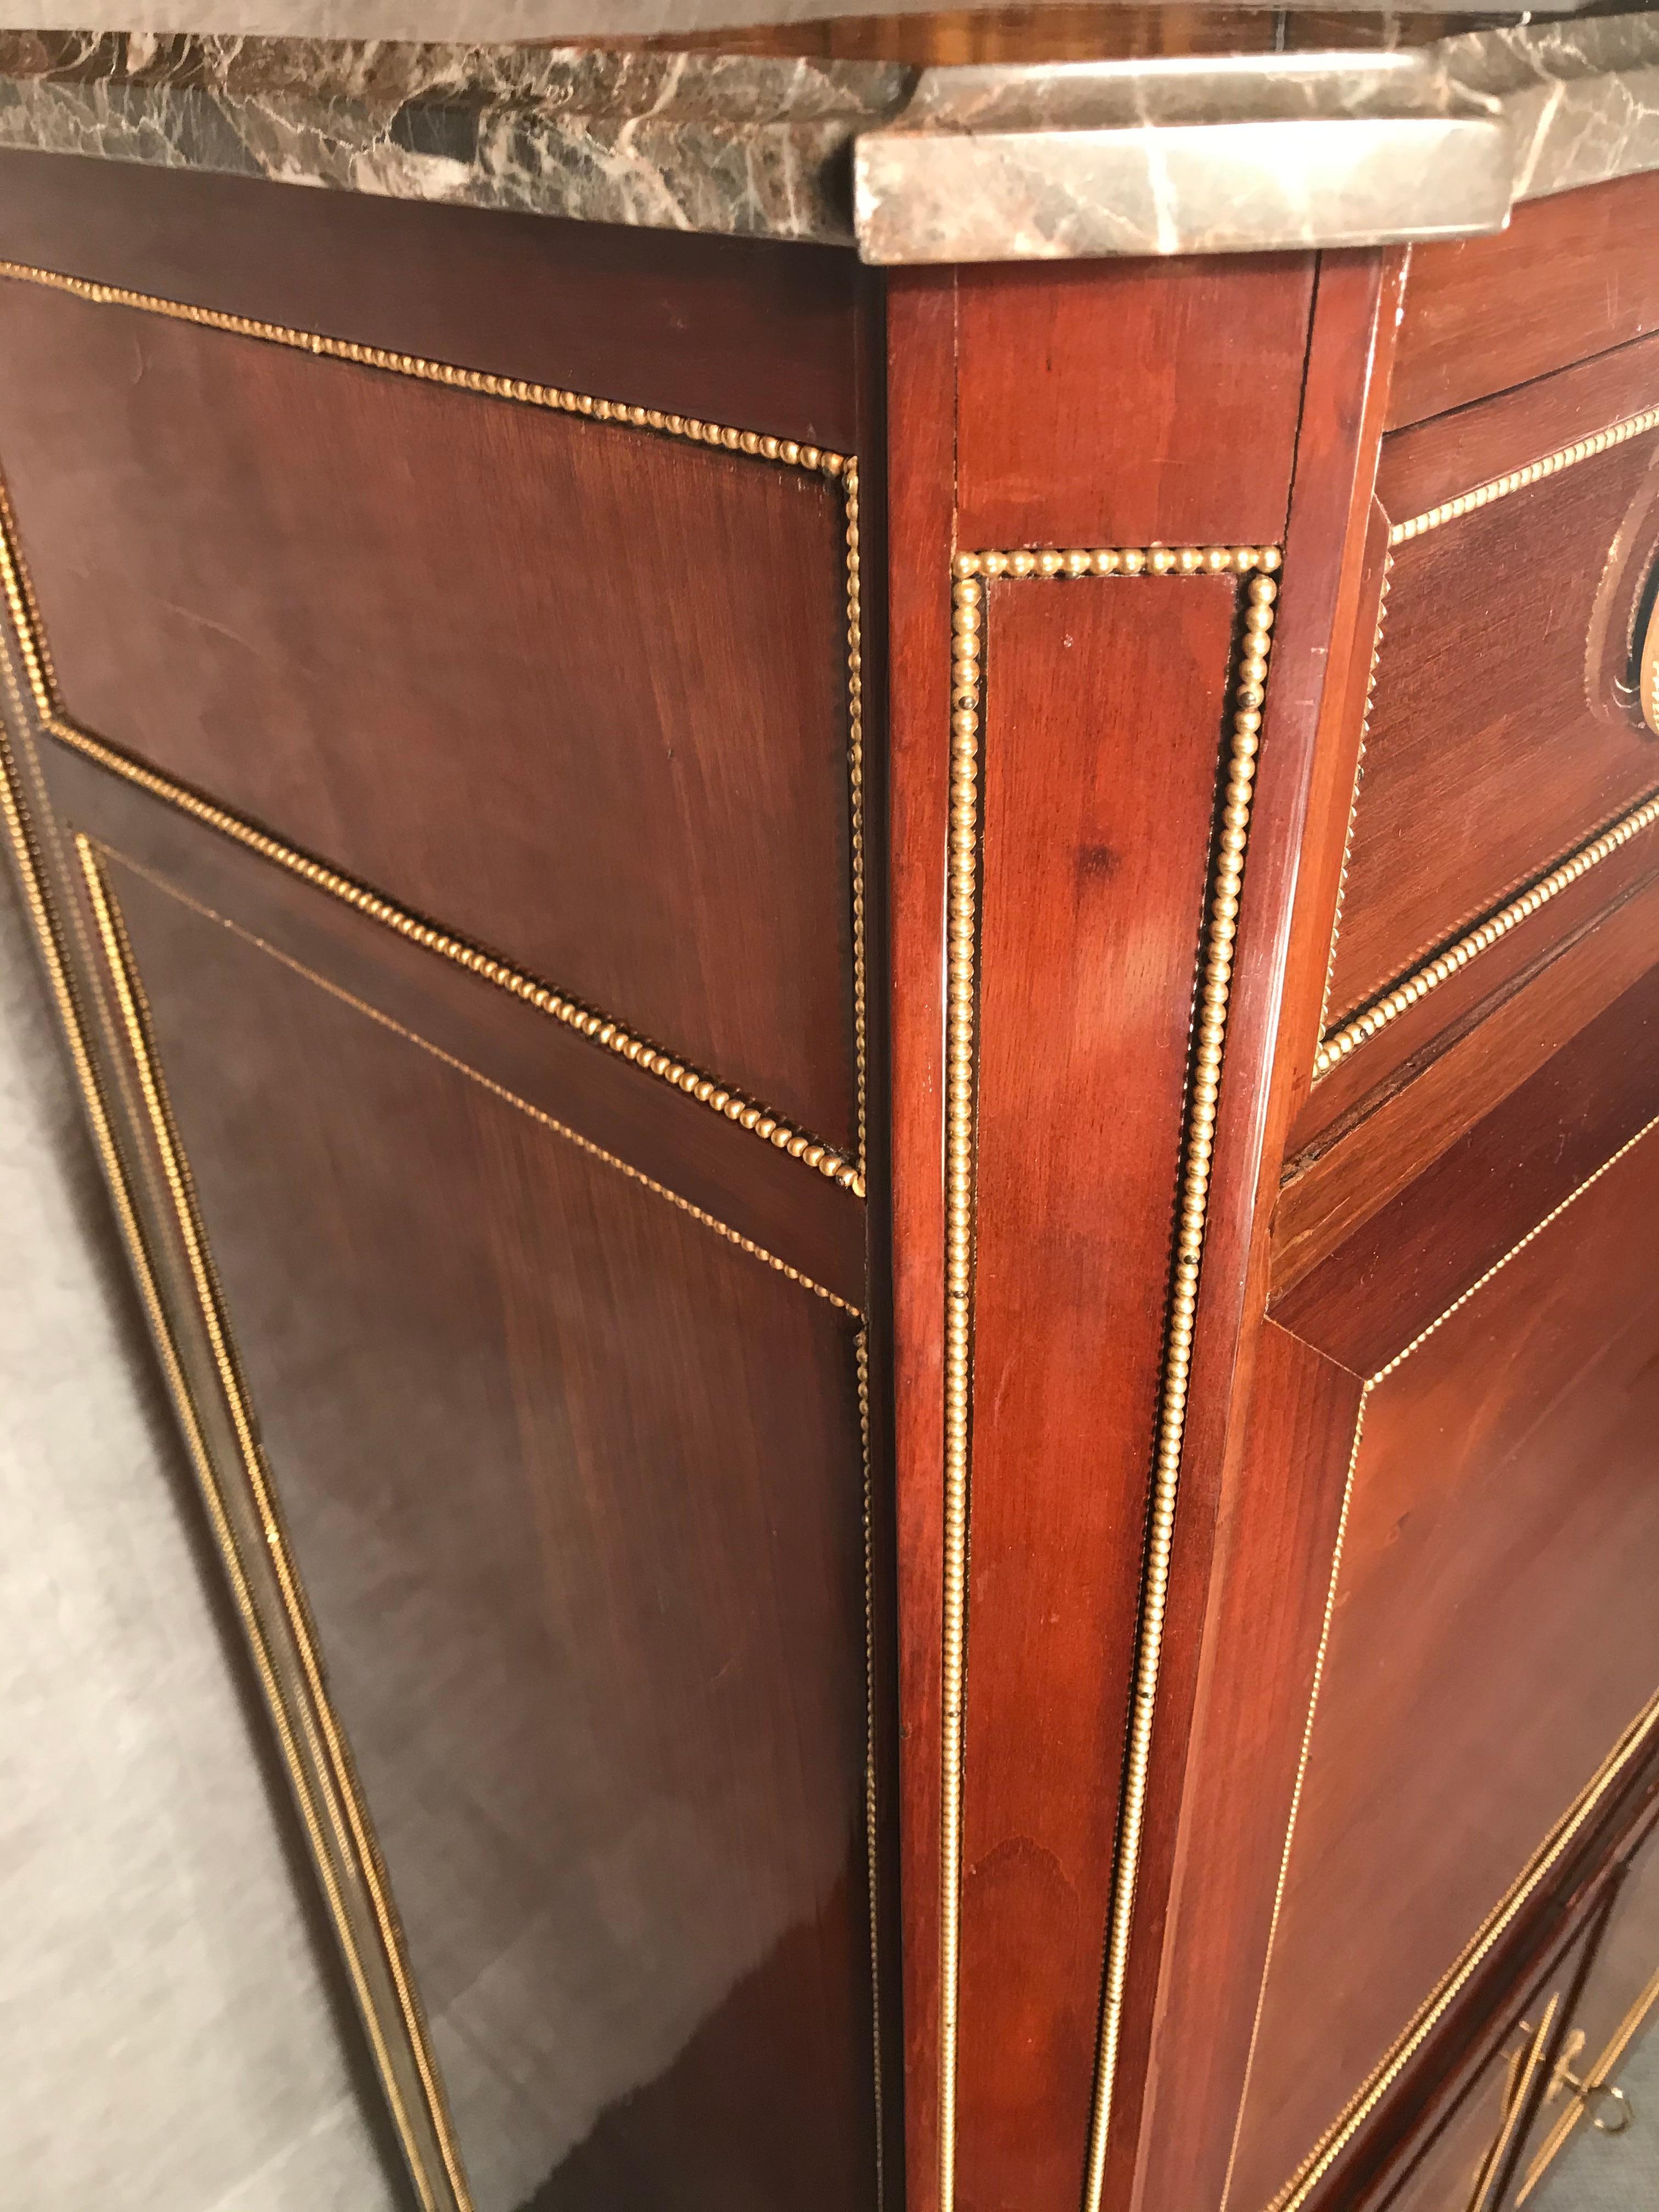 Elegant Directoire drop front secretaire, France Early 19th century, mahogany and elm veneer. Brass bands are framing the drawer, doors and sides. The secretaire has its original grey marble top. It is in very good original condition. The secretaire